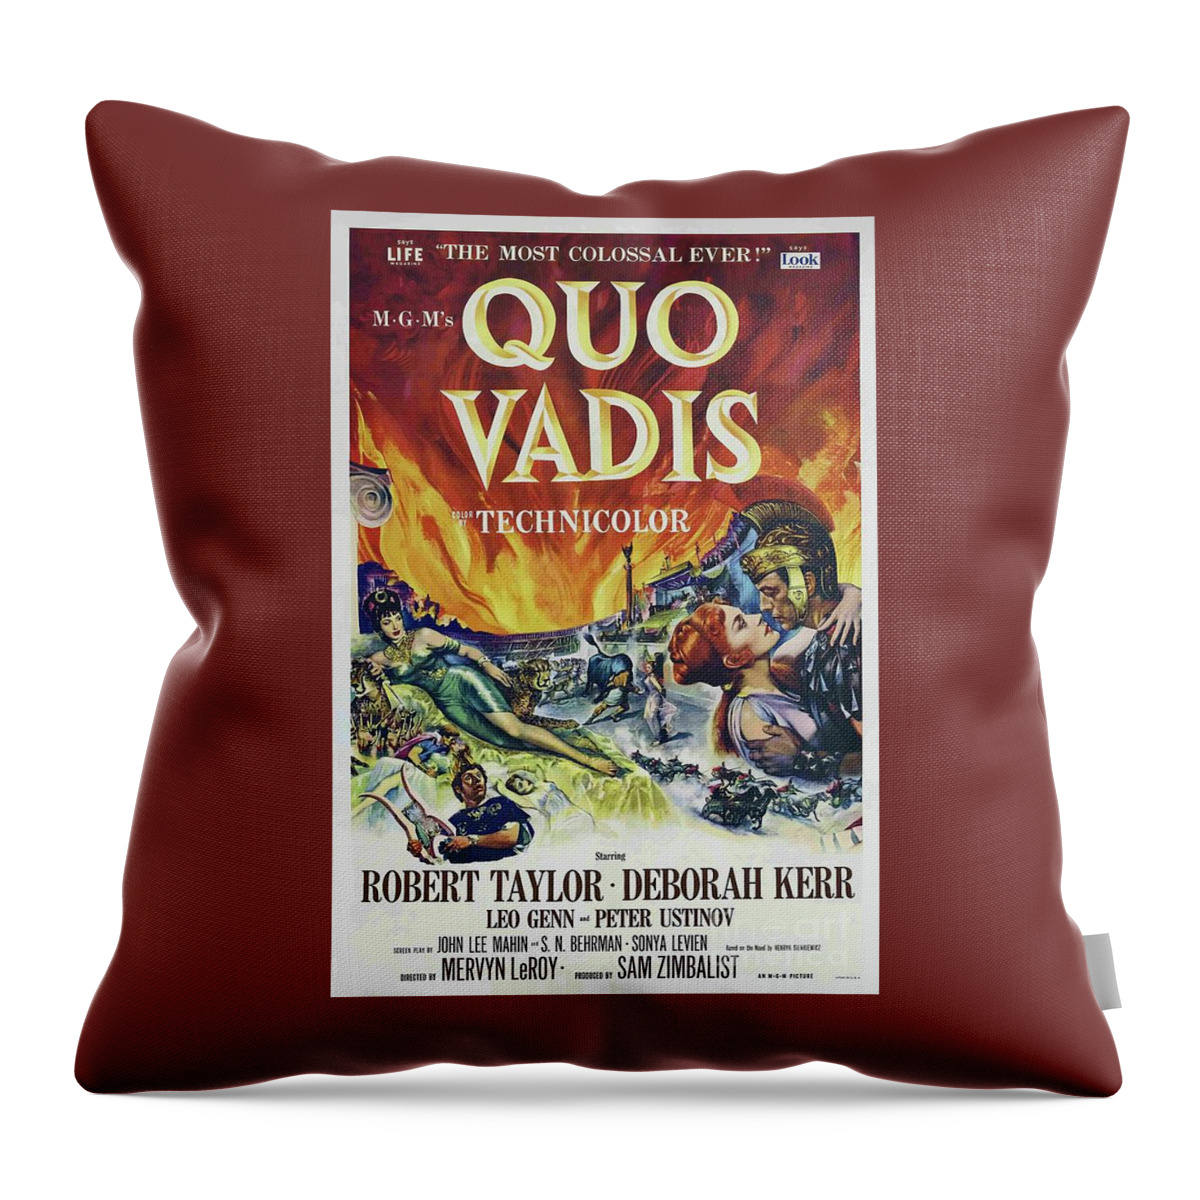 Robert Throw Pillow featuring the painting Classic Movie Poster - Quo Vadis by Esoterica Art Agency